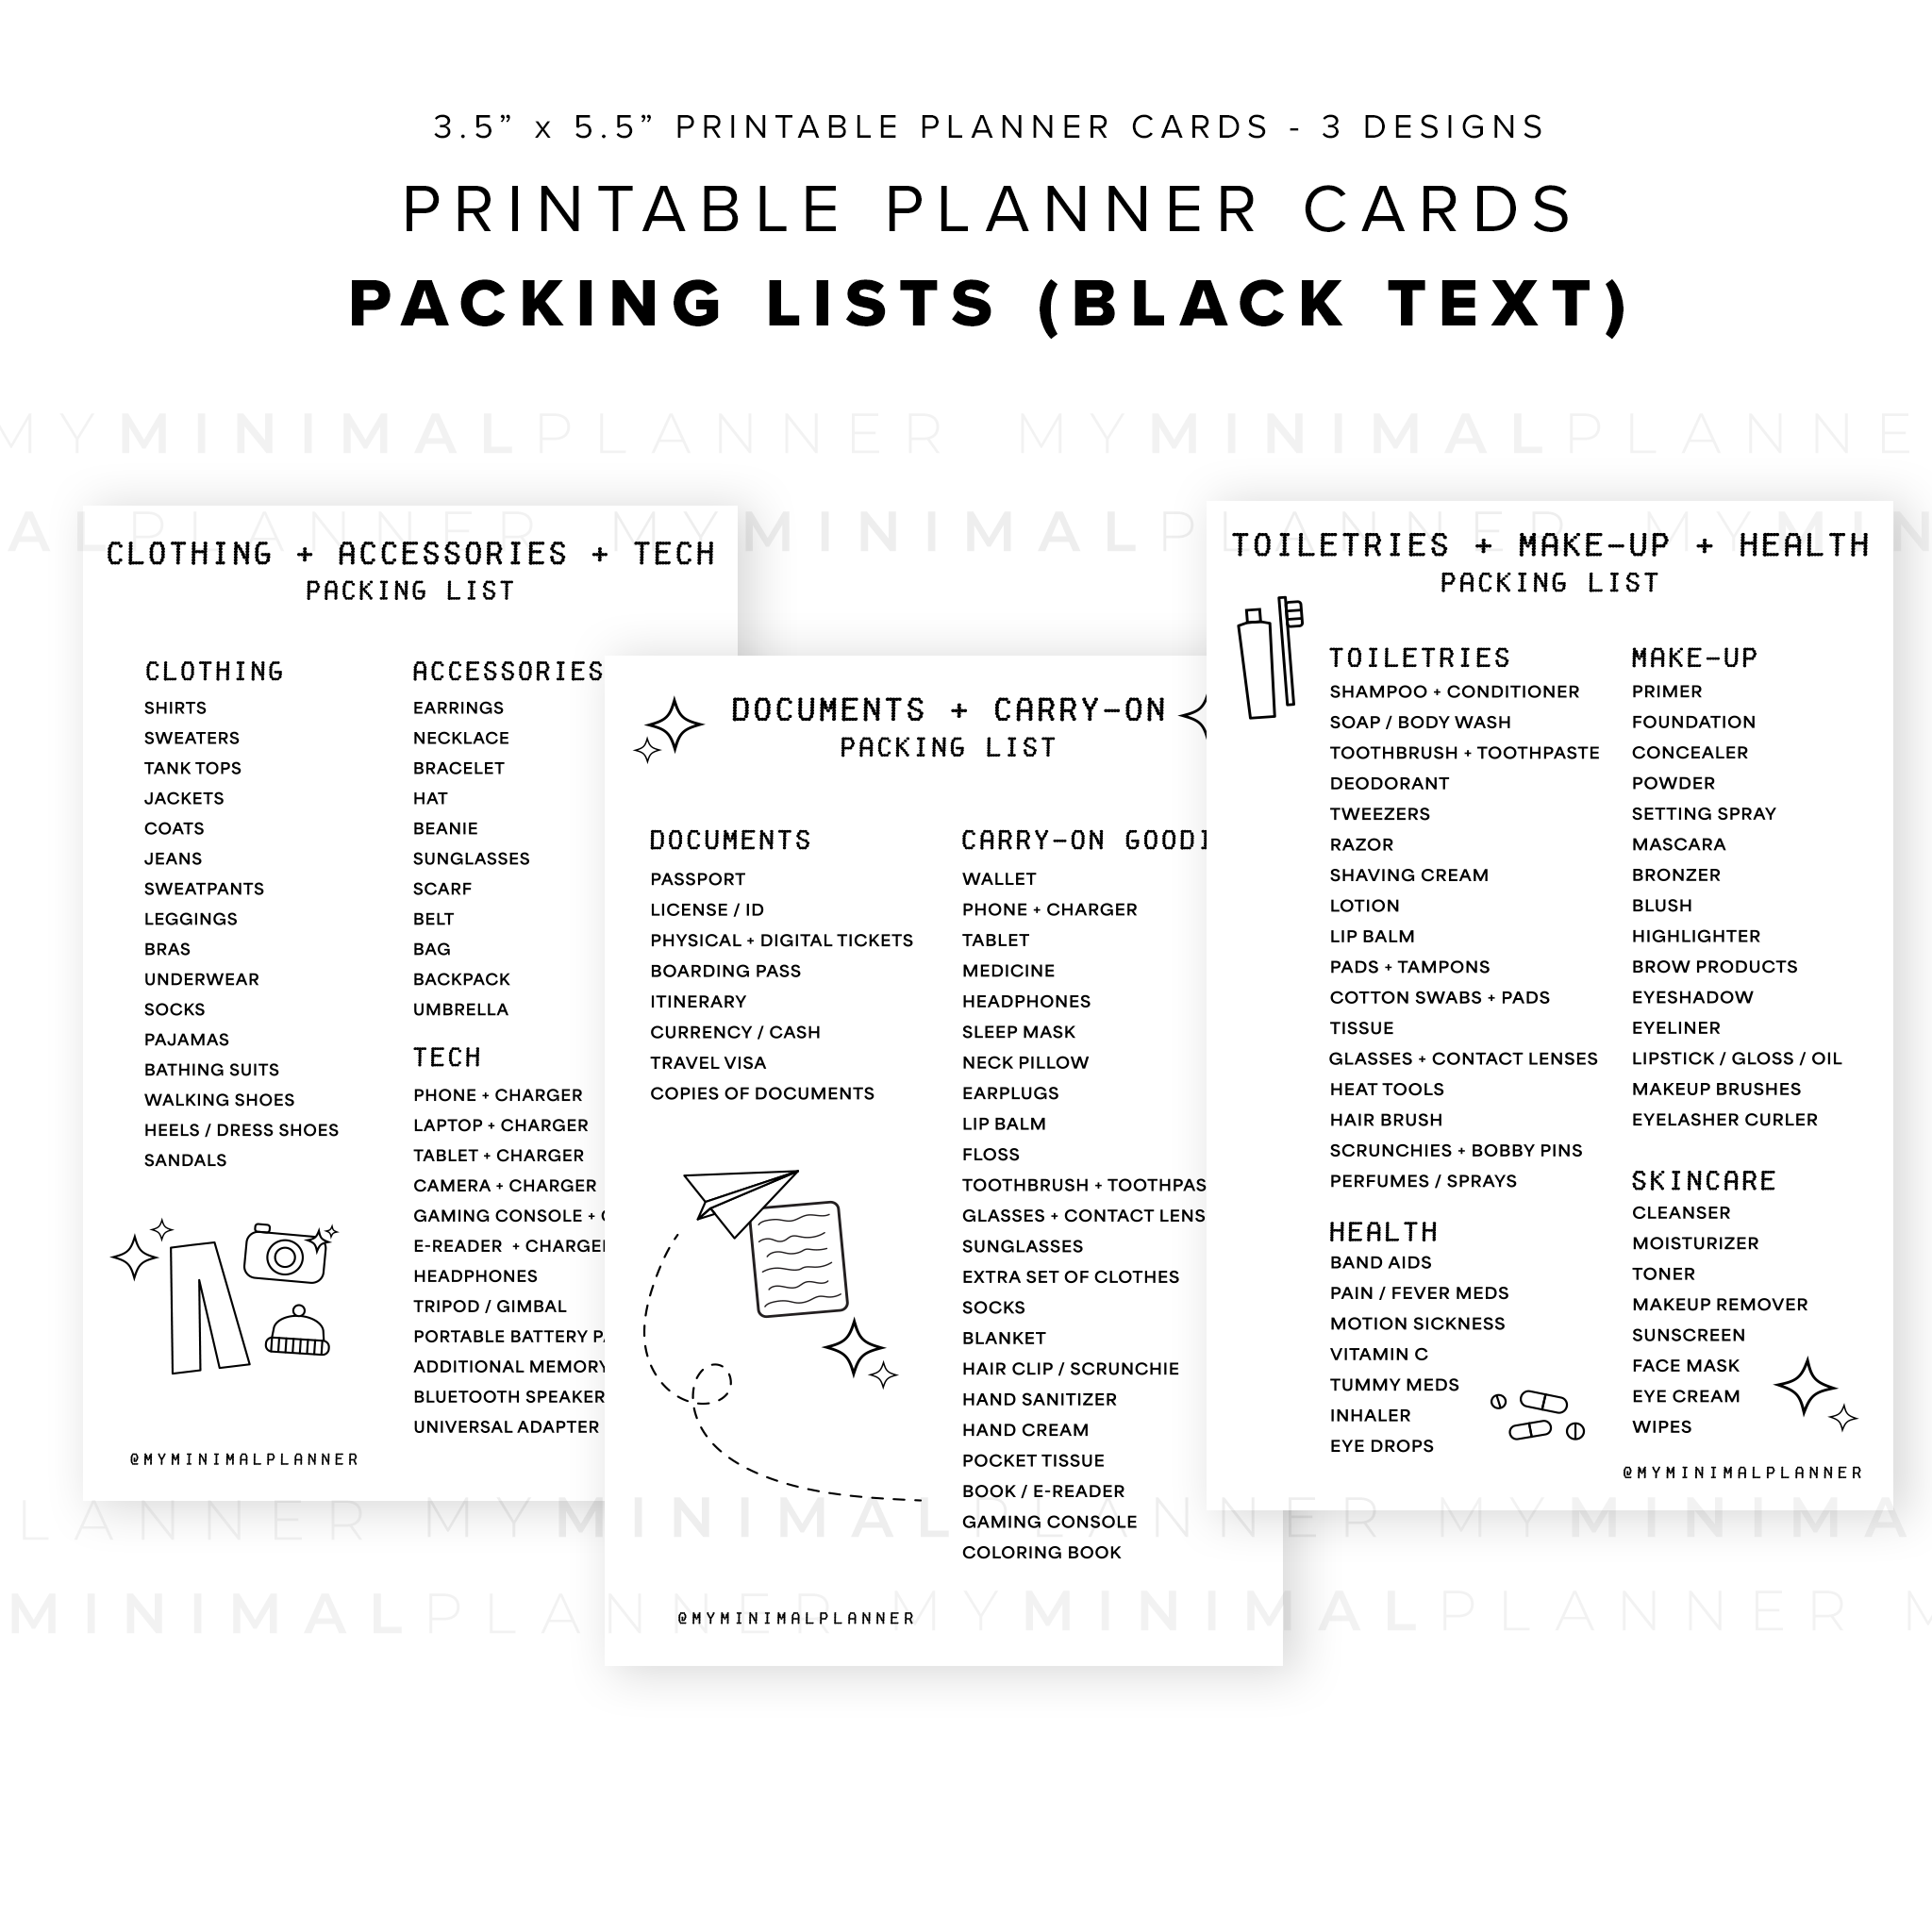 PPC26 - Packing Lists - Printable Planner Cards